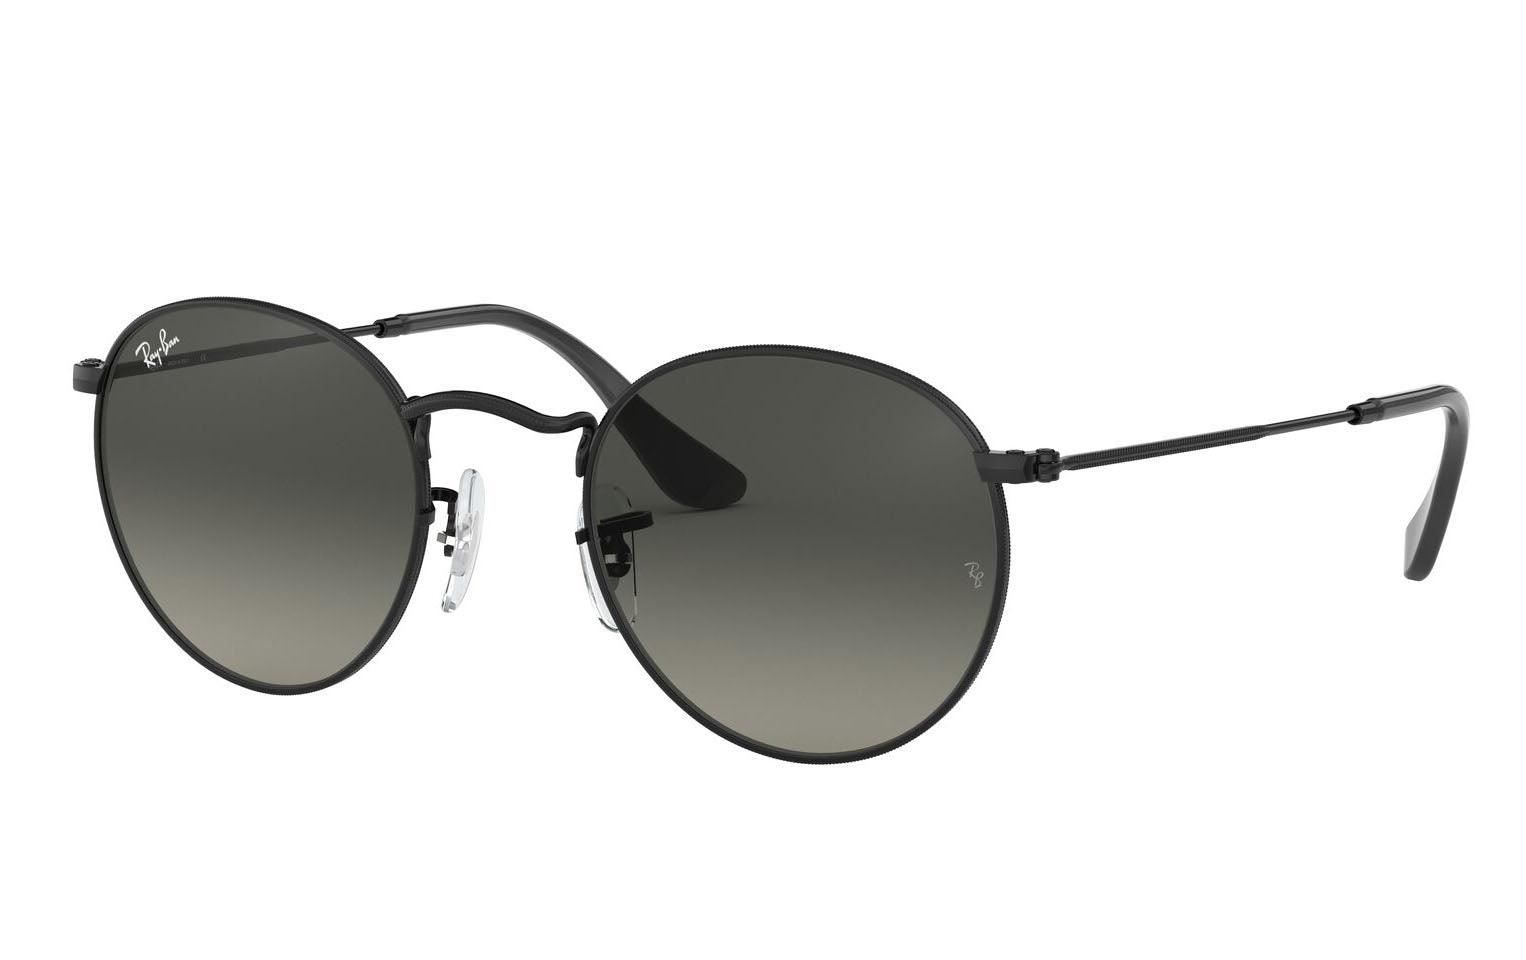 RAY-BAN ROUND METAL 002 71 - Opticas Lookout